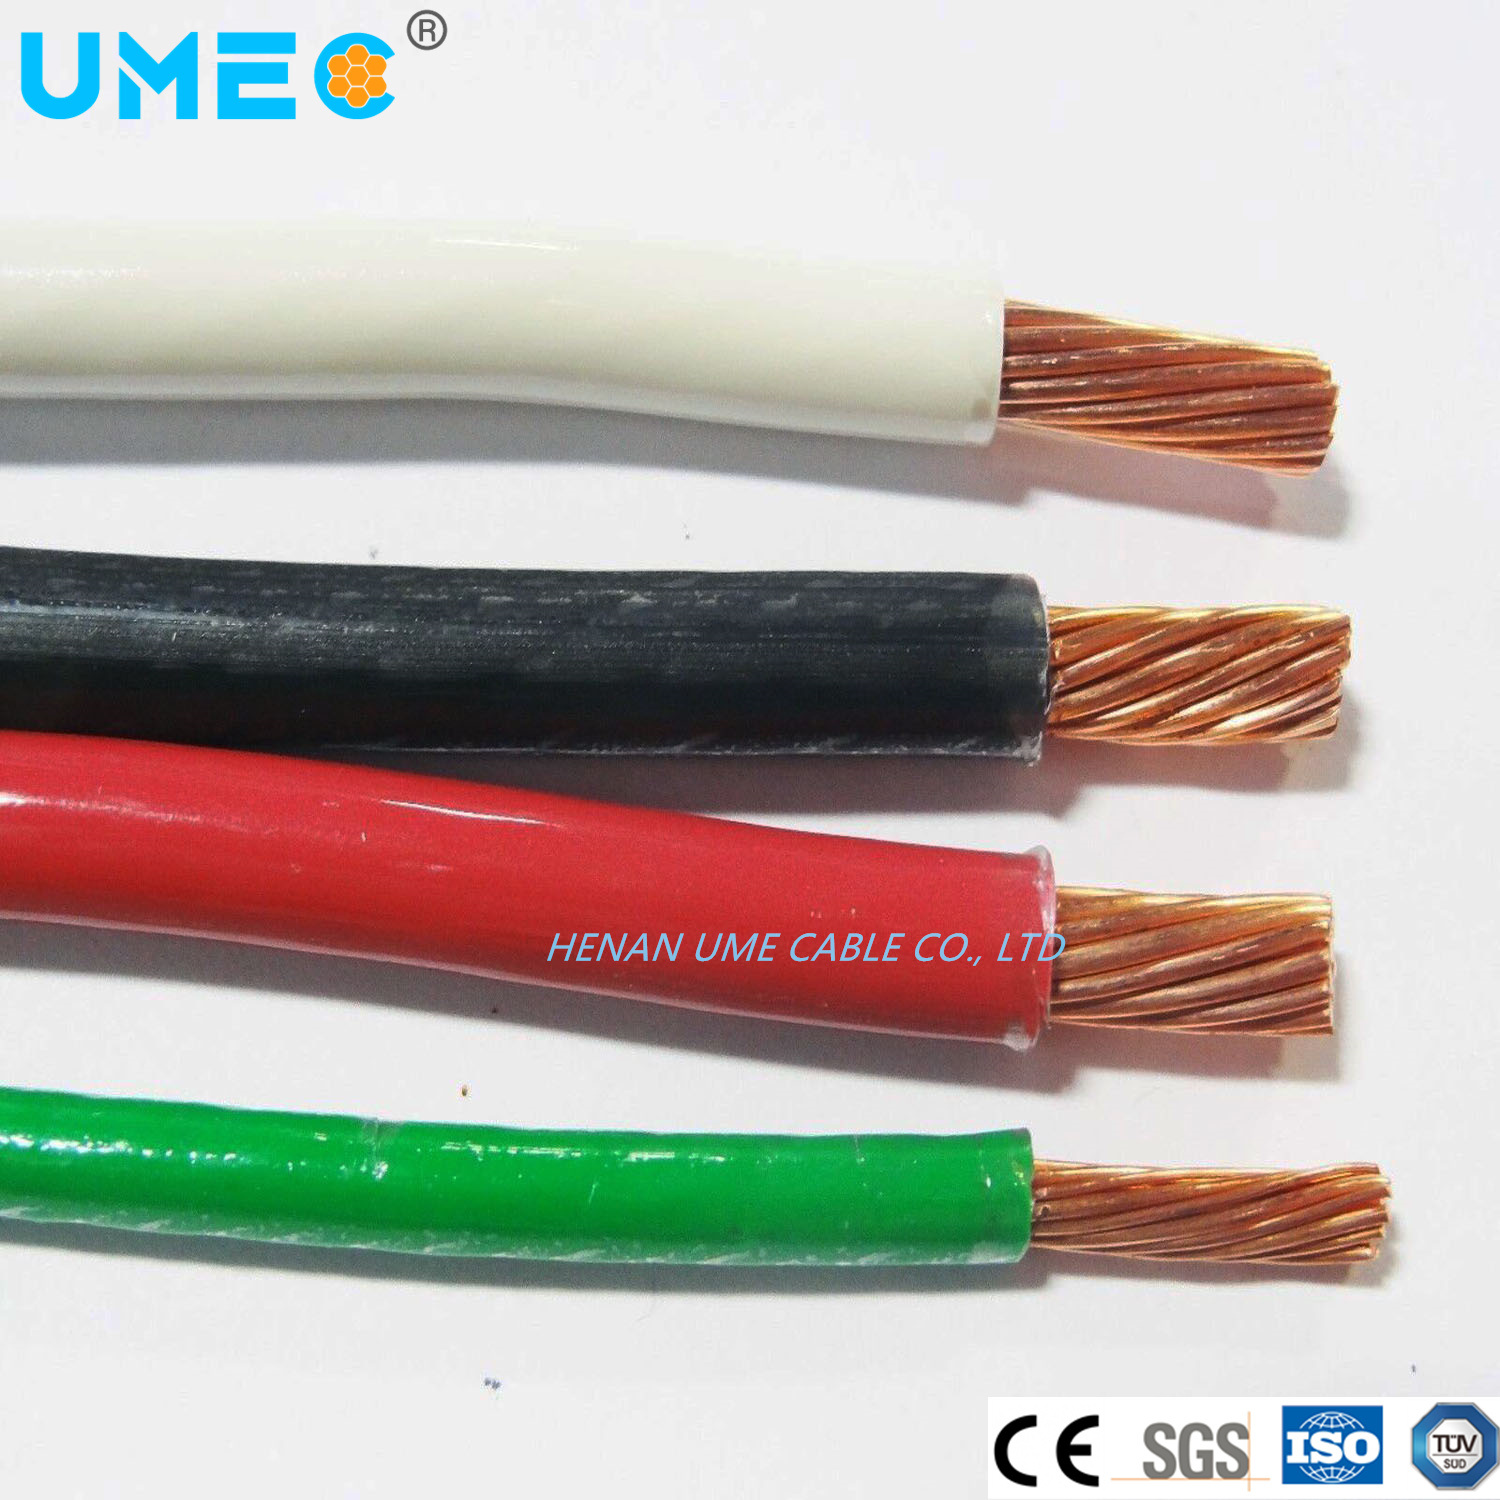 Bulk Price China Manufacturer Thw Thwn Thhn Wire 10AWG 12 AWG 14 AWG PVC Insulated Nylon Sheath Cable